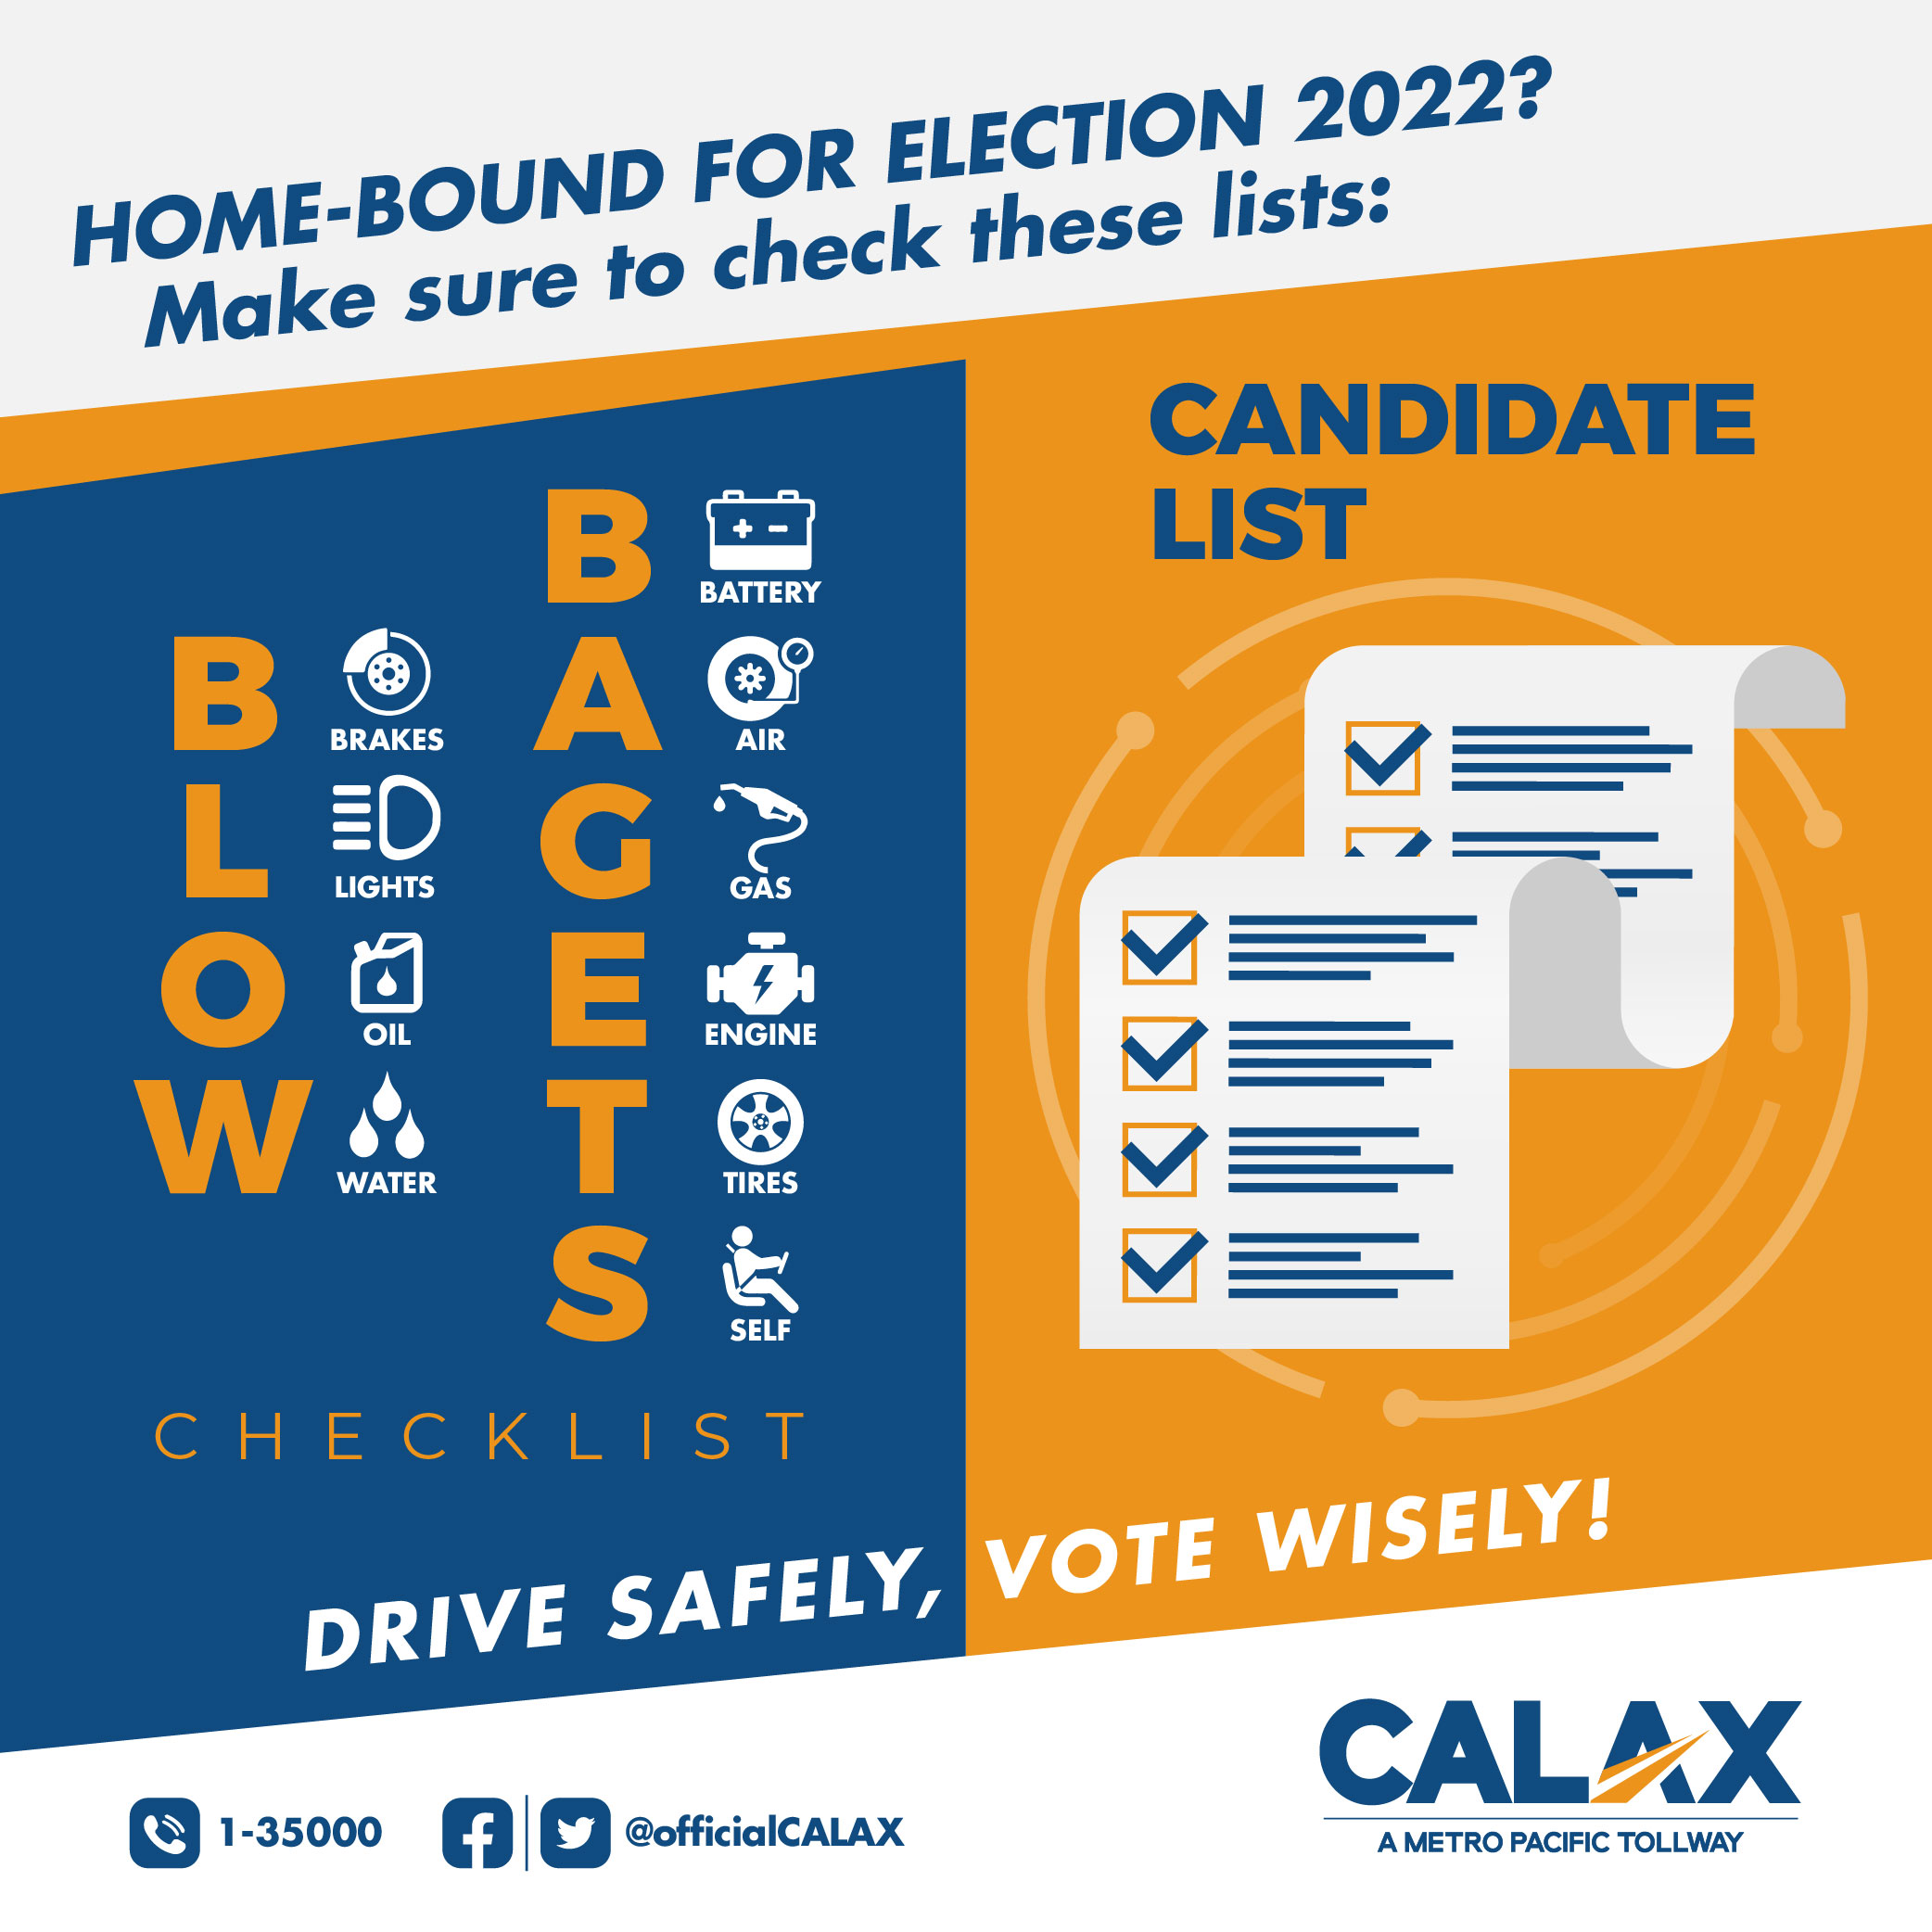 DRIVE SAFELY VOTE WISELY